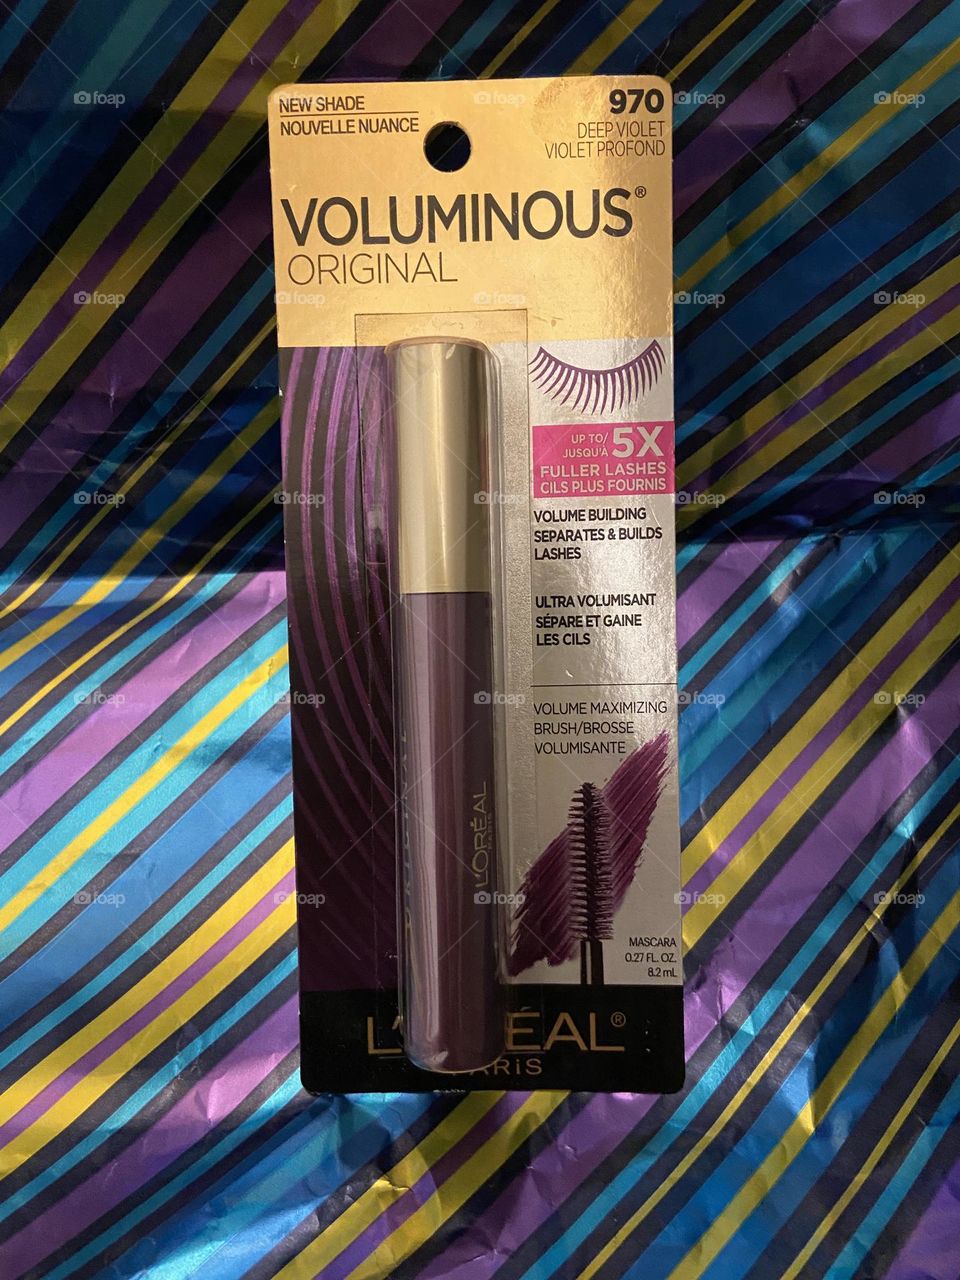 A photo of L’Oréal Voluminous Mascara in the fun shade of Deep Violet against a rich striped background in complimentary colors. Purple to me is sophisticated yet playful, rich and beautiful. 